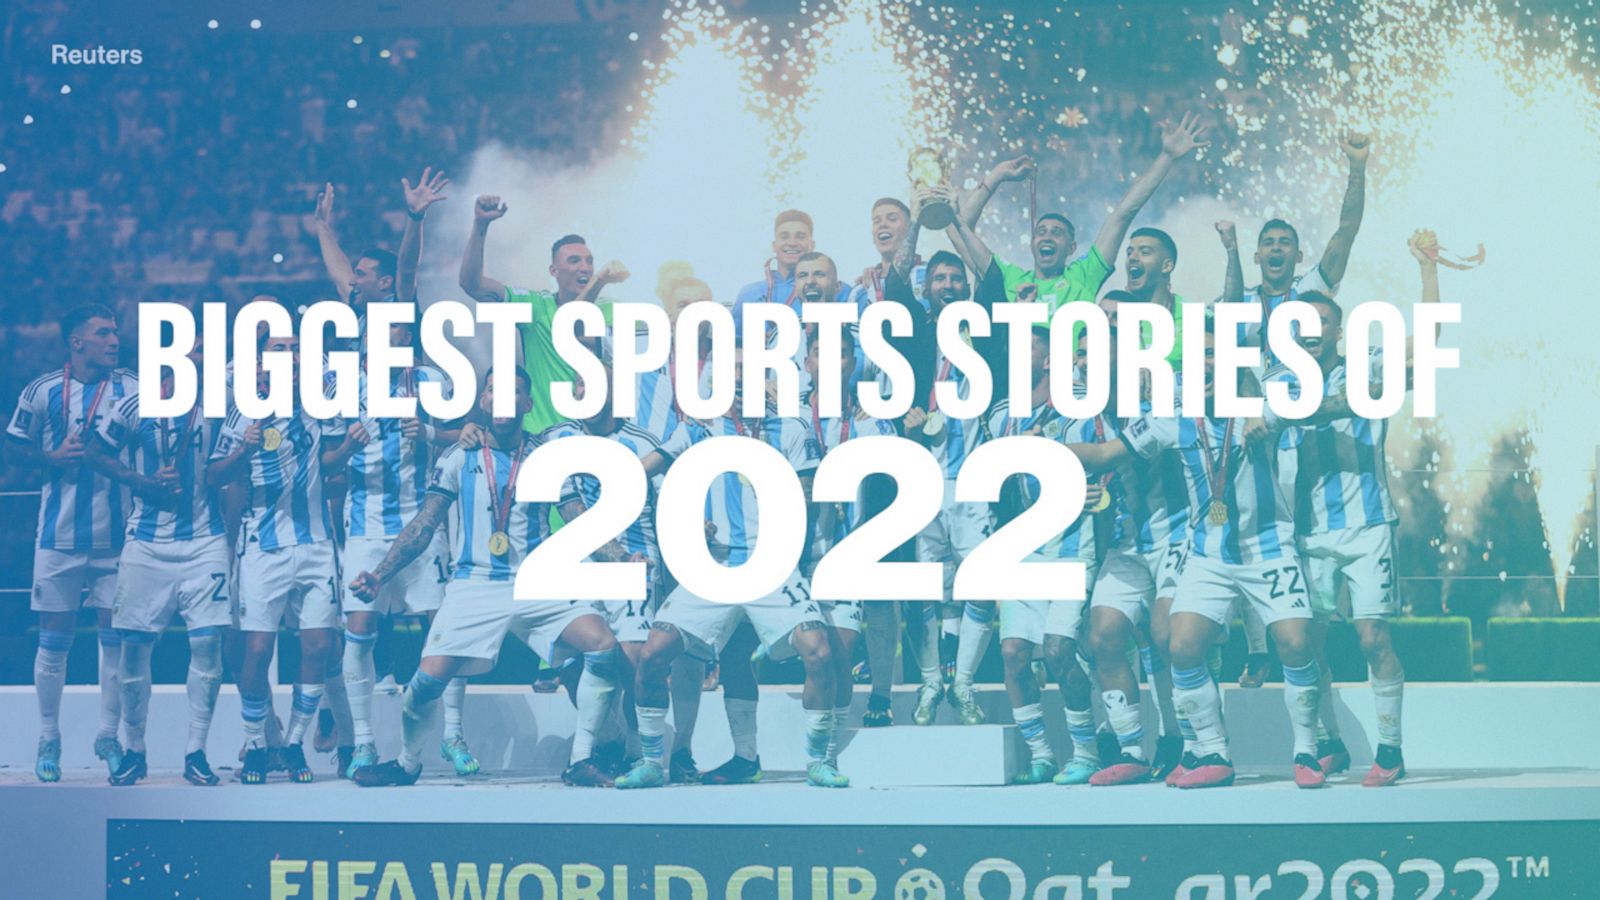 10 craziest sports stories of 2022 Good Morning America